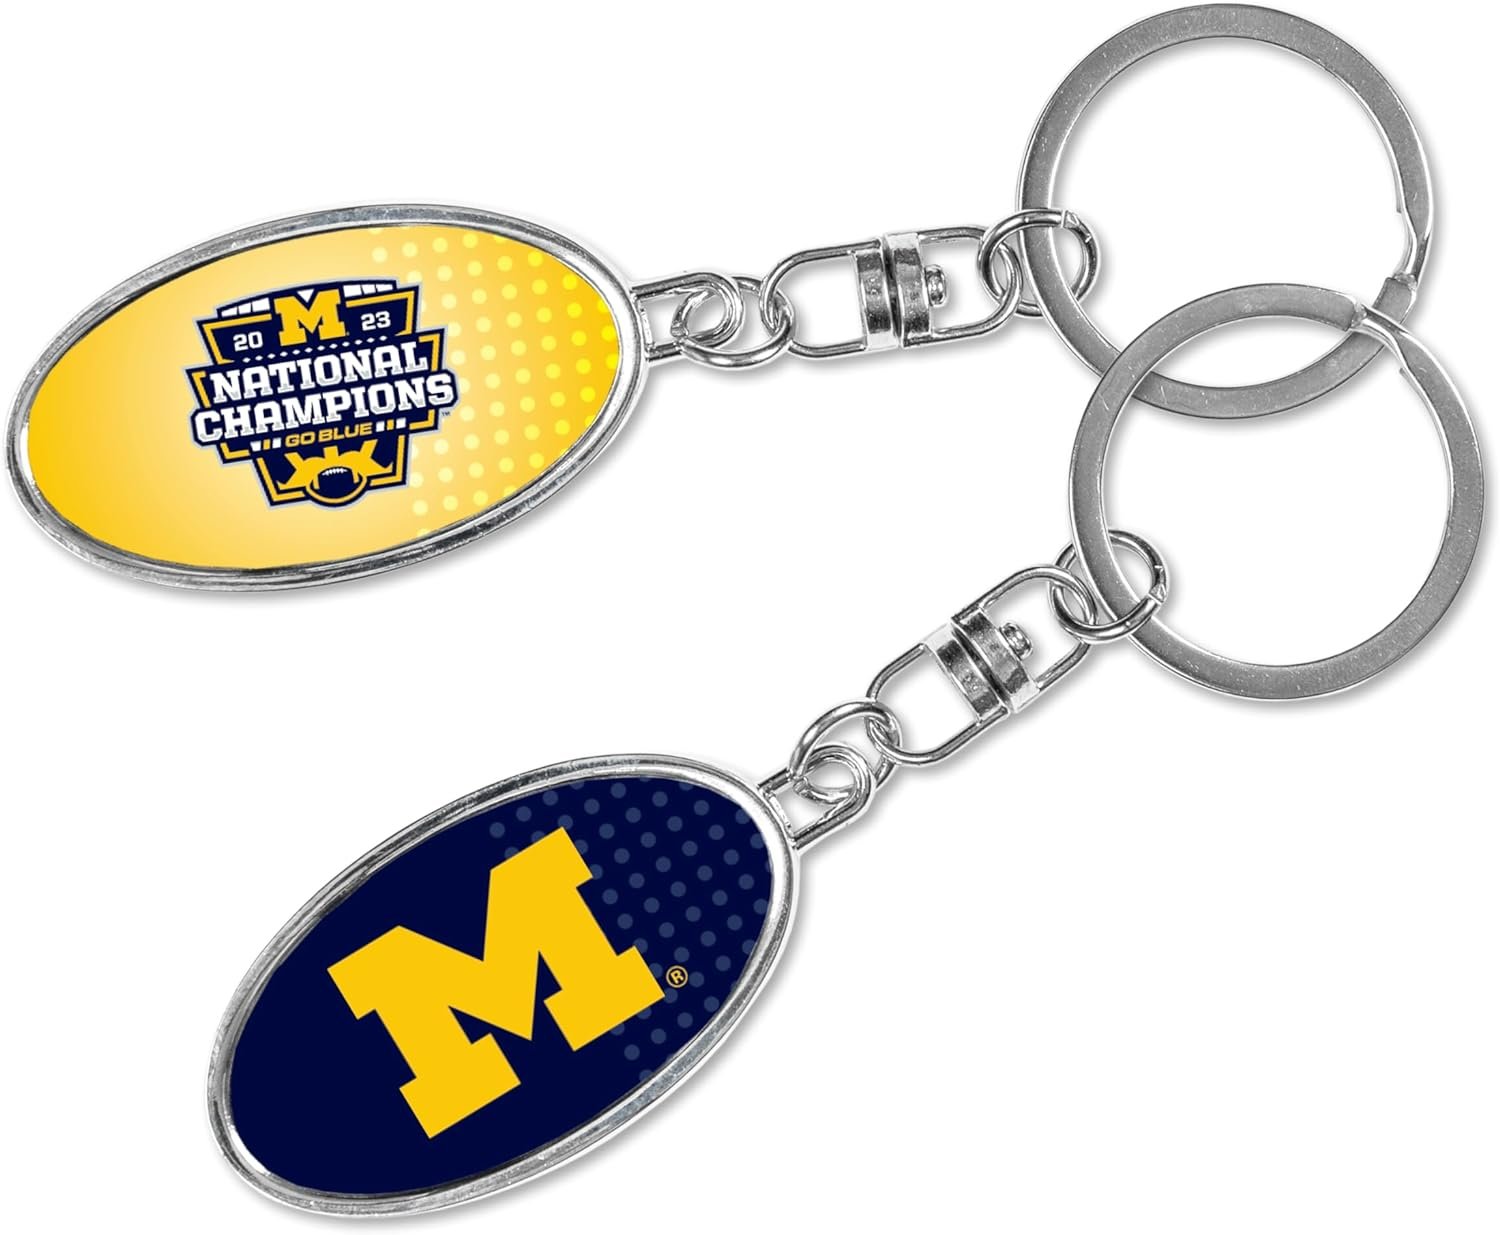 University of Michigan Wolverines 2024 Champions Premium Metal Keychain, 2-Sided Spinner, Oval Fob